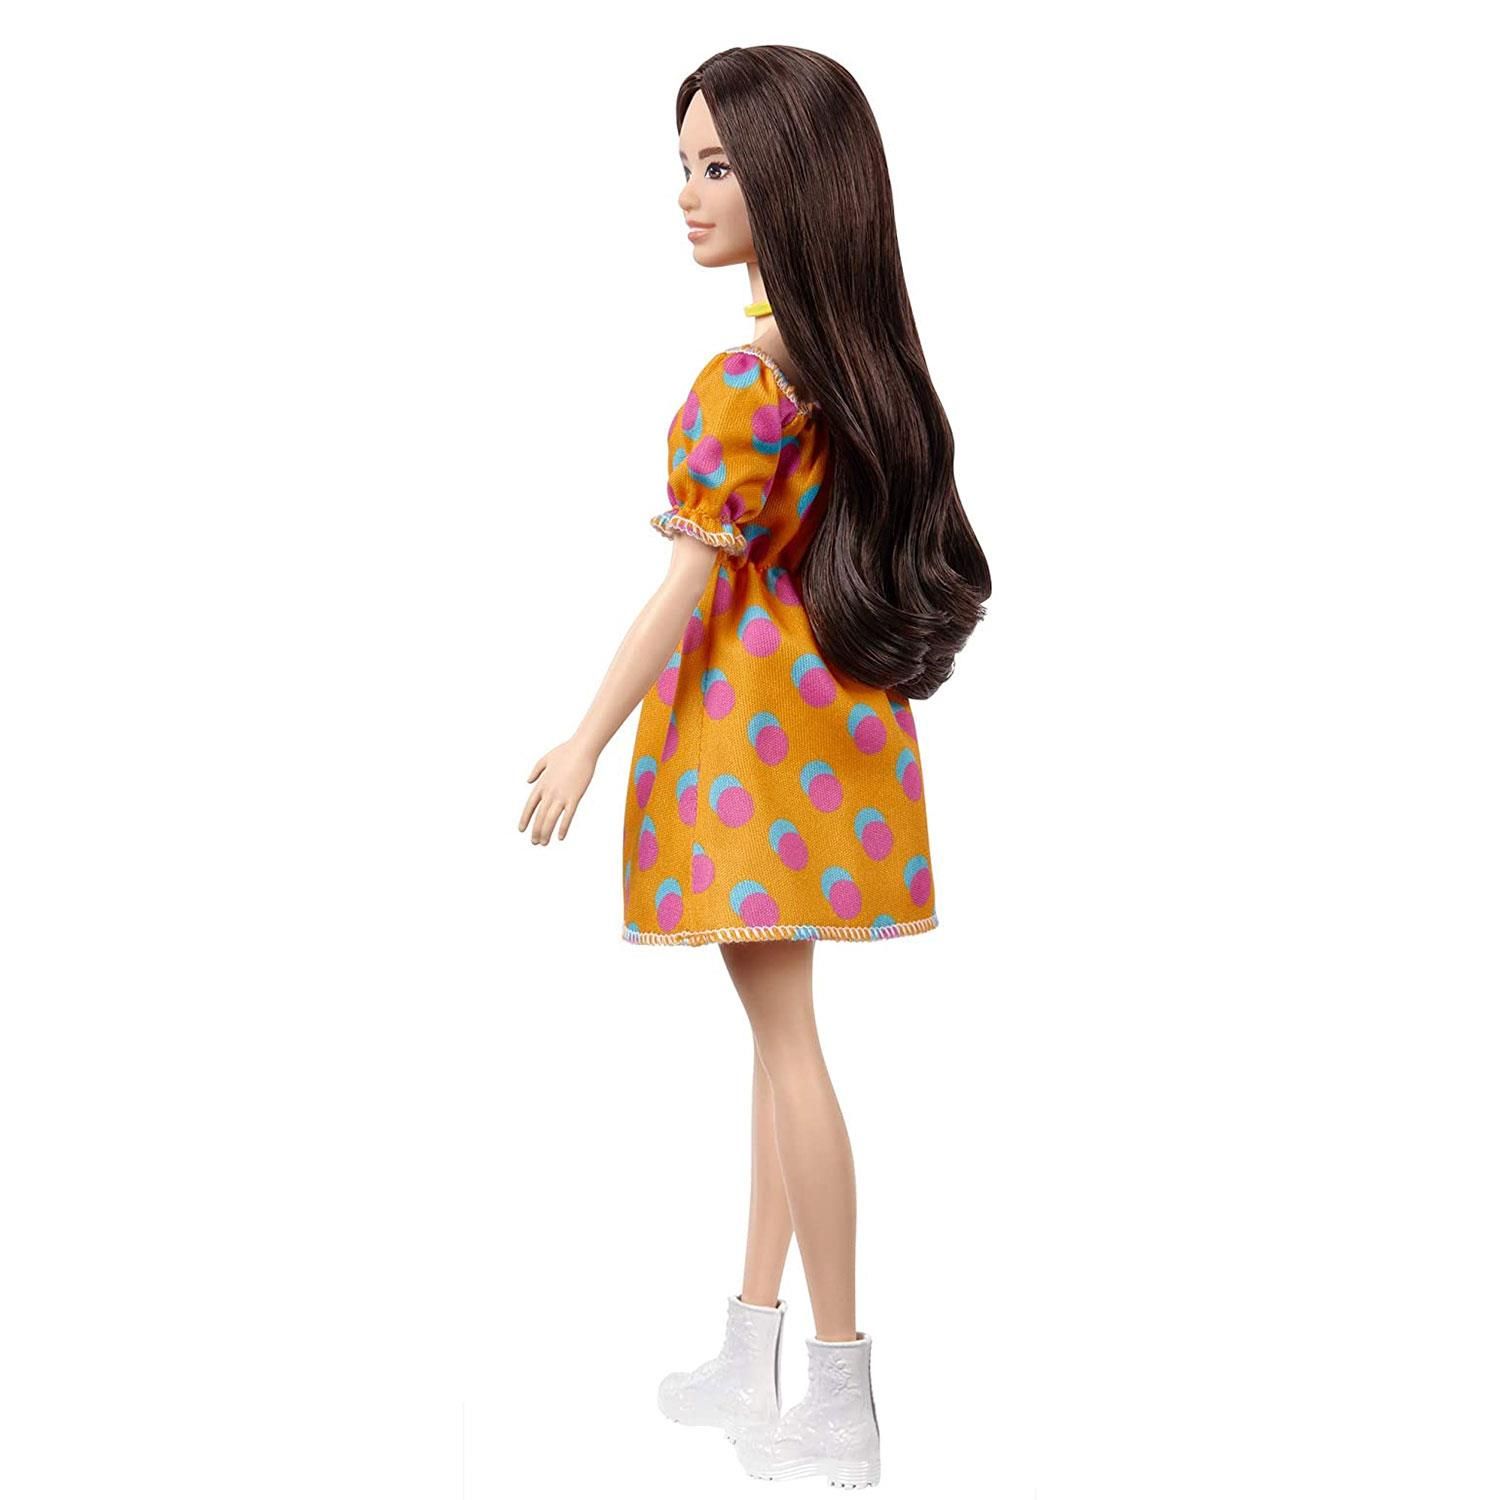 Barbie Fashionista Doll with Orange Fruit Dress, Great Toy For 3 Years Old & Up

Barbie and Ken Fashionistas celebrate diversity with fashion dolls that encourage real-world storytelling and open-ended dreams! With a wide variety of skin tones, eye colours, hair colours and textures, body types and fashions, the dolls are designed to reflect the world kids see today - and their attention-grabbing outfits help them stand out with personalities that pop! Use the reusable vinyl package to fill, carry and customize - store Barbie fashions and accessories, carry a doll anywhere or decorate and use it as a cross-body purse! Kids can collect Barbie dolls and accessories for infinite ways to play out stories, express their own style and discover that fashion is fun for everyone! Includes Barbie Fashionistas doll wearing fashions and accessories. 

Features:

The latest line of BarbieFashionistas dolls includes different body types and a mix of skin tones, eye colours, hair colours, hairstyles and so many fashions inspired by the latest trends!​
Barbiedoll is the Original body type and wears an orange dress with a colourful pattern.​

White shoes and a yellow choker necklace complete the outfit with cool touches, and her long brunette hair is styled with a slight wave for a trendy look. ​

Designed with a zipper, the reusable vinyl bag can be used to store the doll or other Barbiefashions and accessories, and kids can customize it with their own art supplies, like stickers. There are endless ways to play --fill it, carry it and customize it!

Specifications:

Toy Type: Doll
Material: Abs Plastic
Colour: Orange
Age Range: 3 Years & up

Package Includes: Barbie Fashionista Doll, Orange Fruit Dress